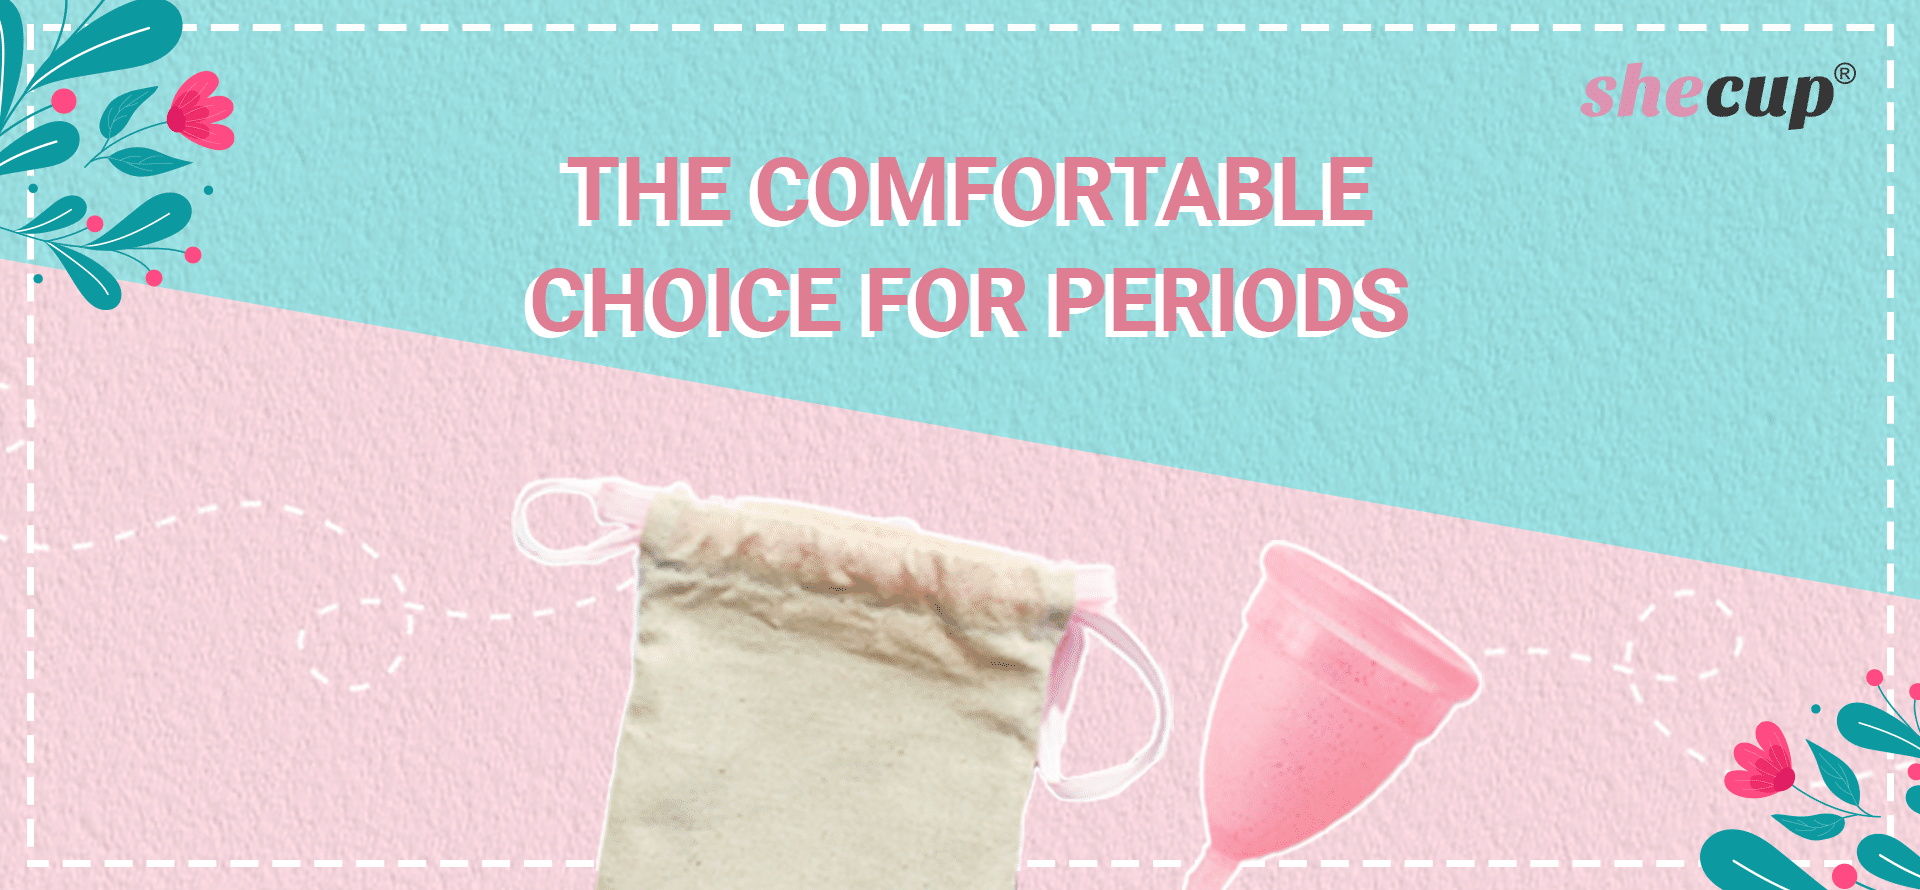 Menstrual Cup in Mumbai at best price by Mediaceso (Shecup) - Justdial